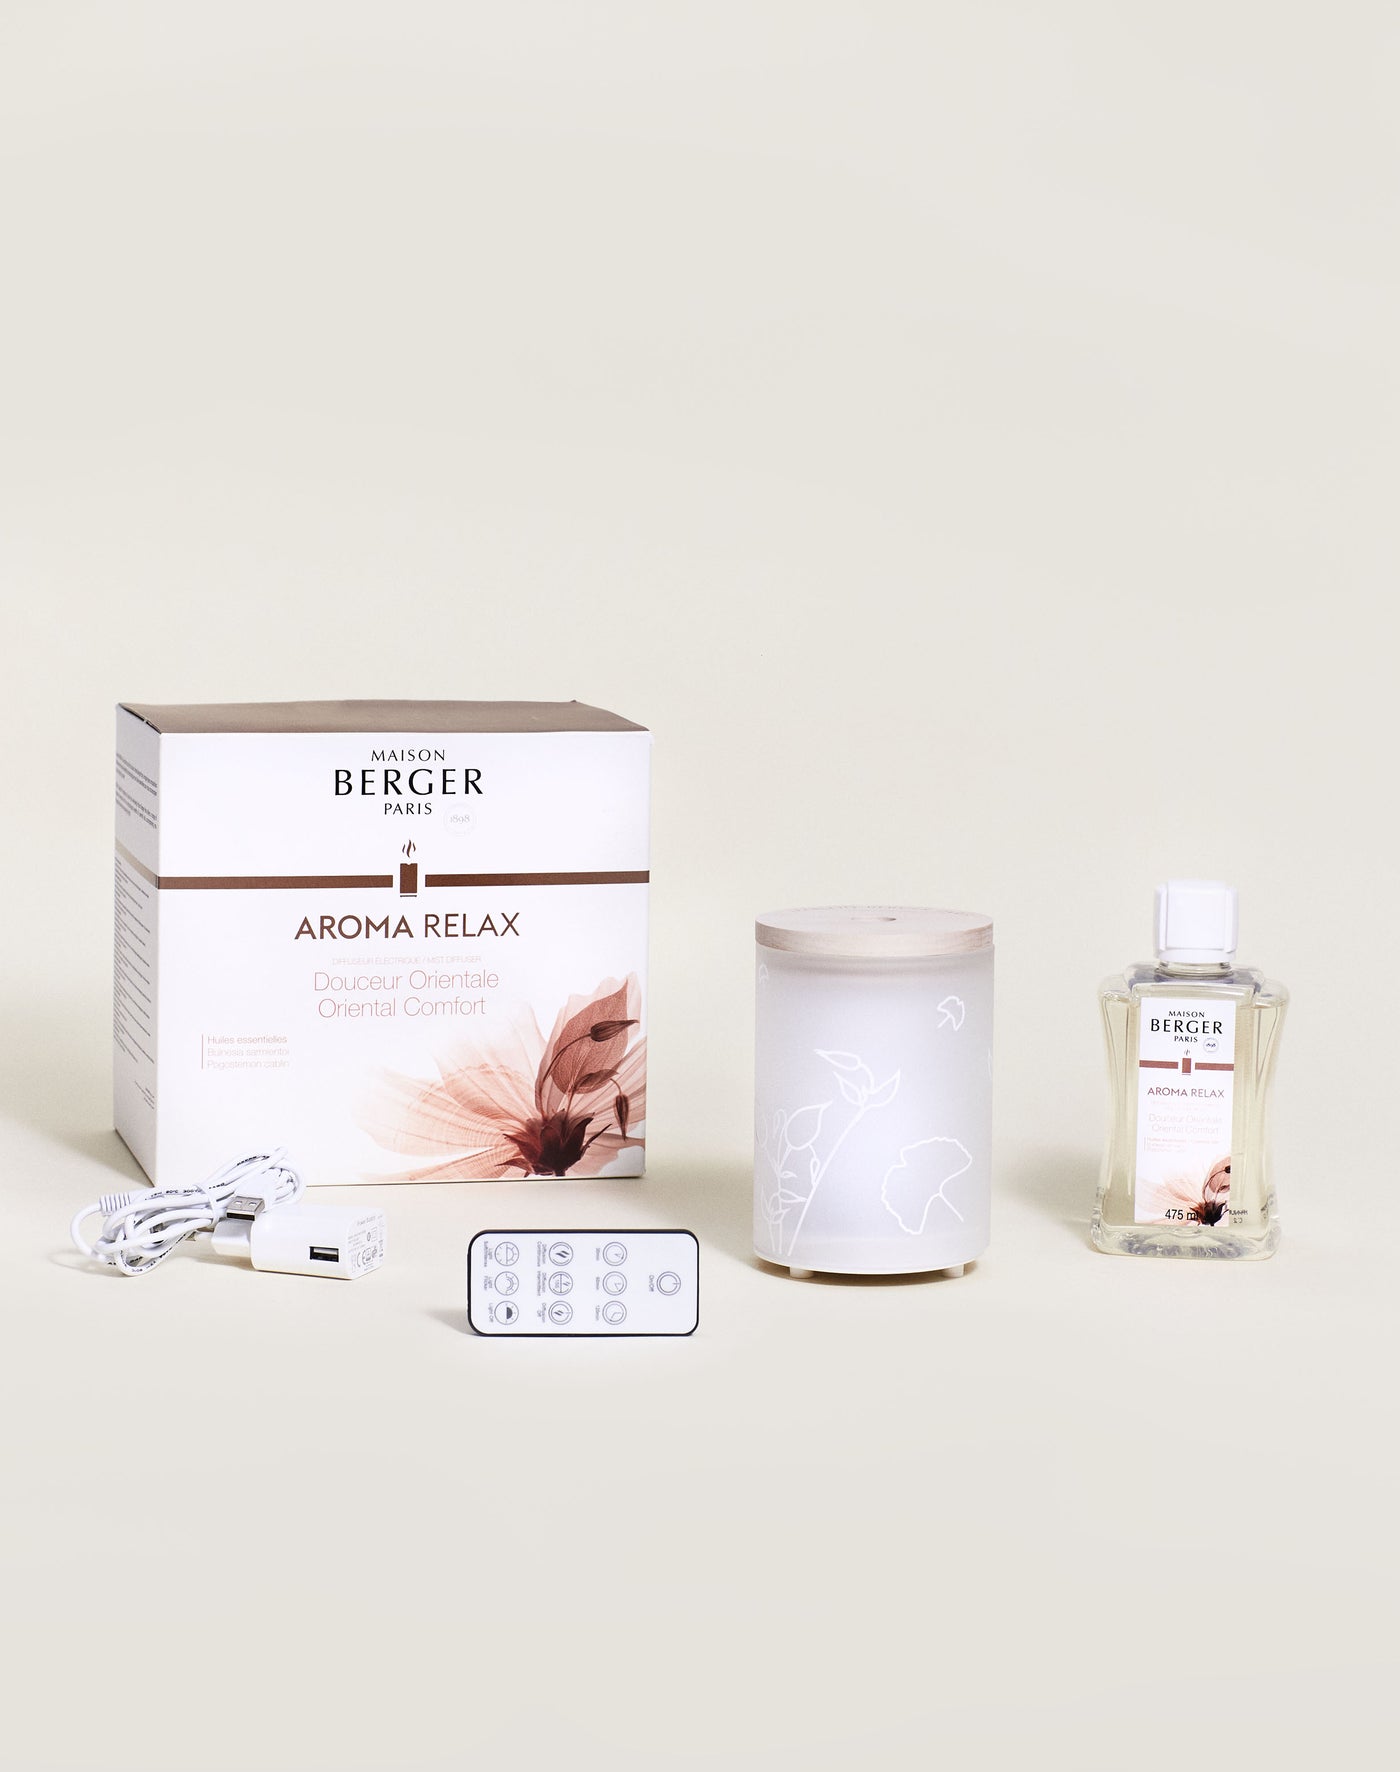 Aroma Relax Mist Diffuser